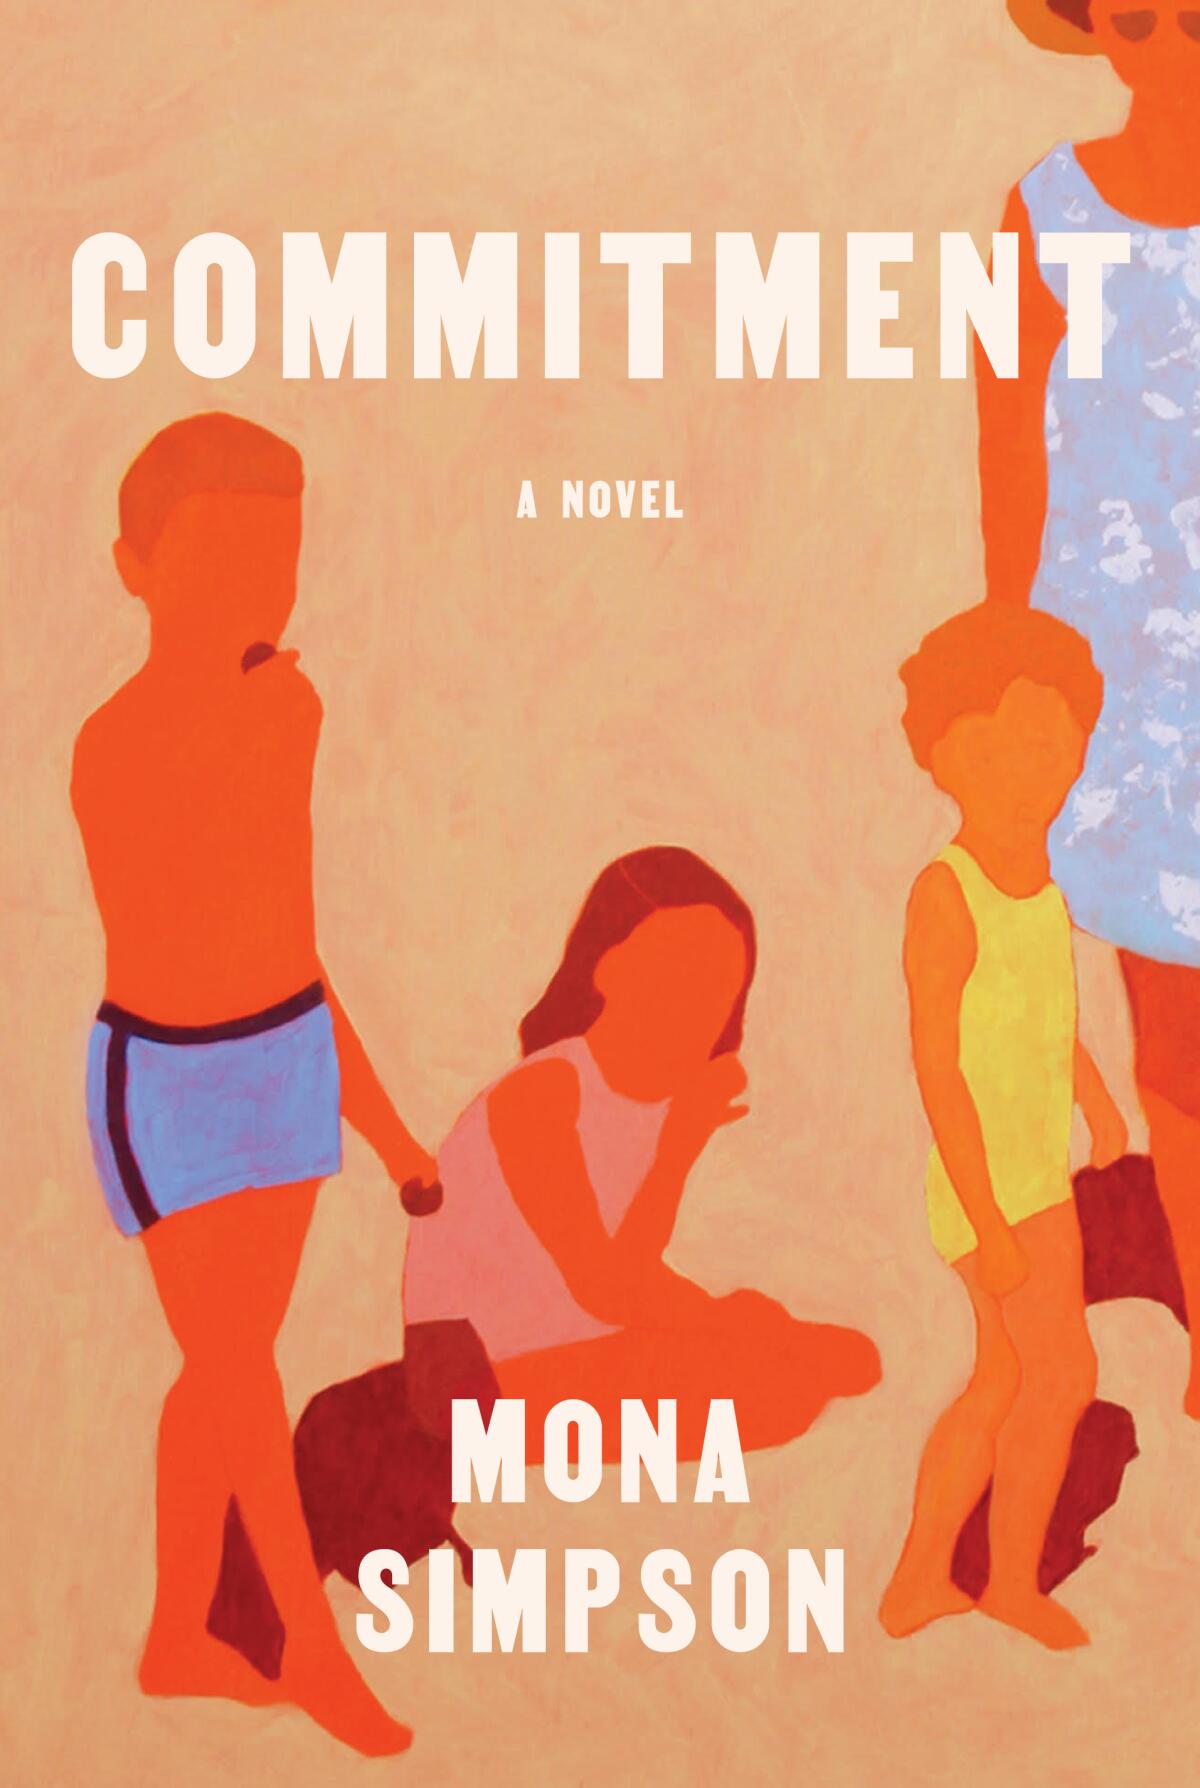 "Commitment," by Mona Simpson